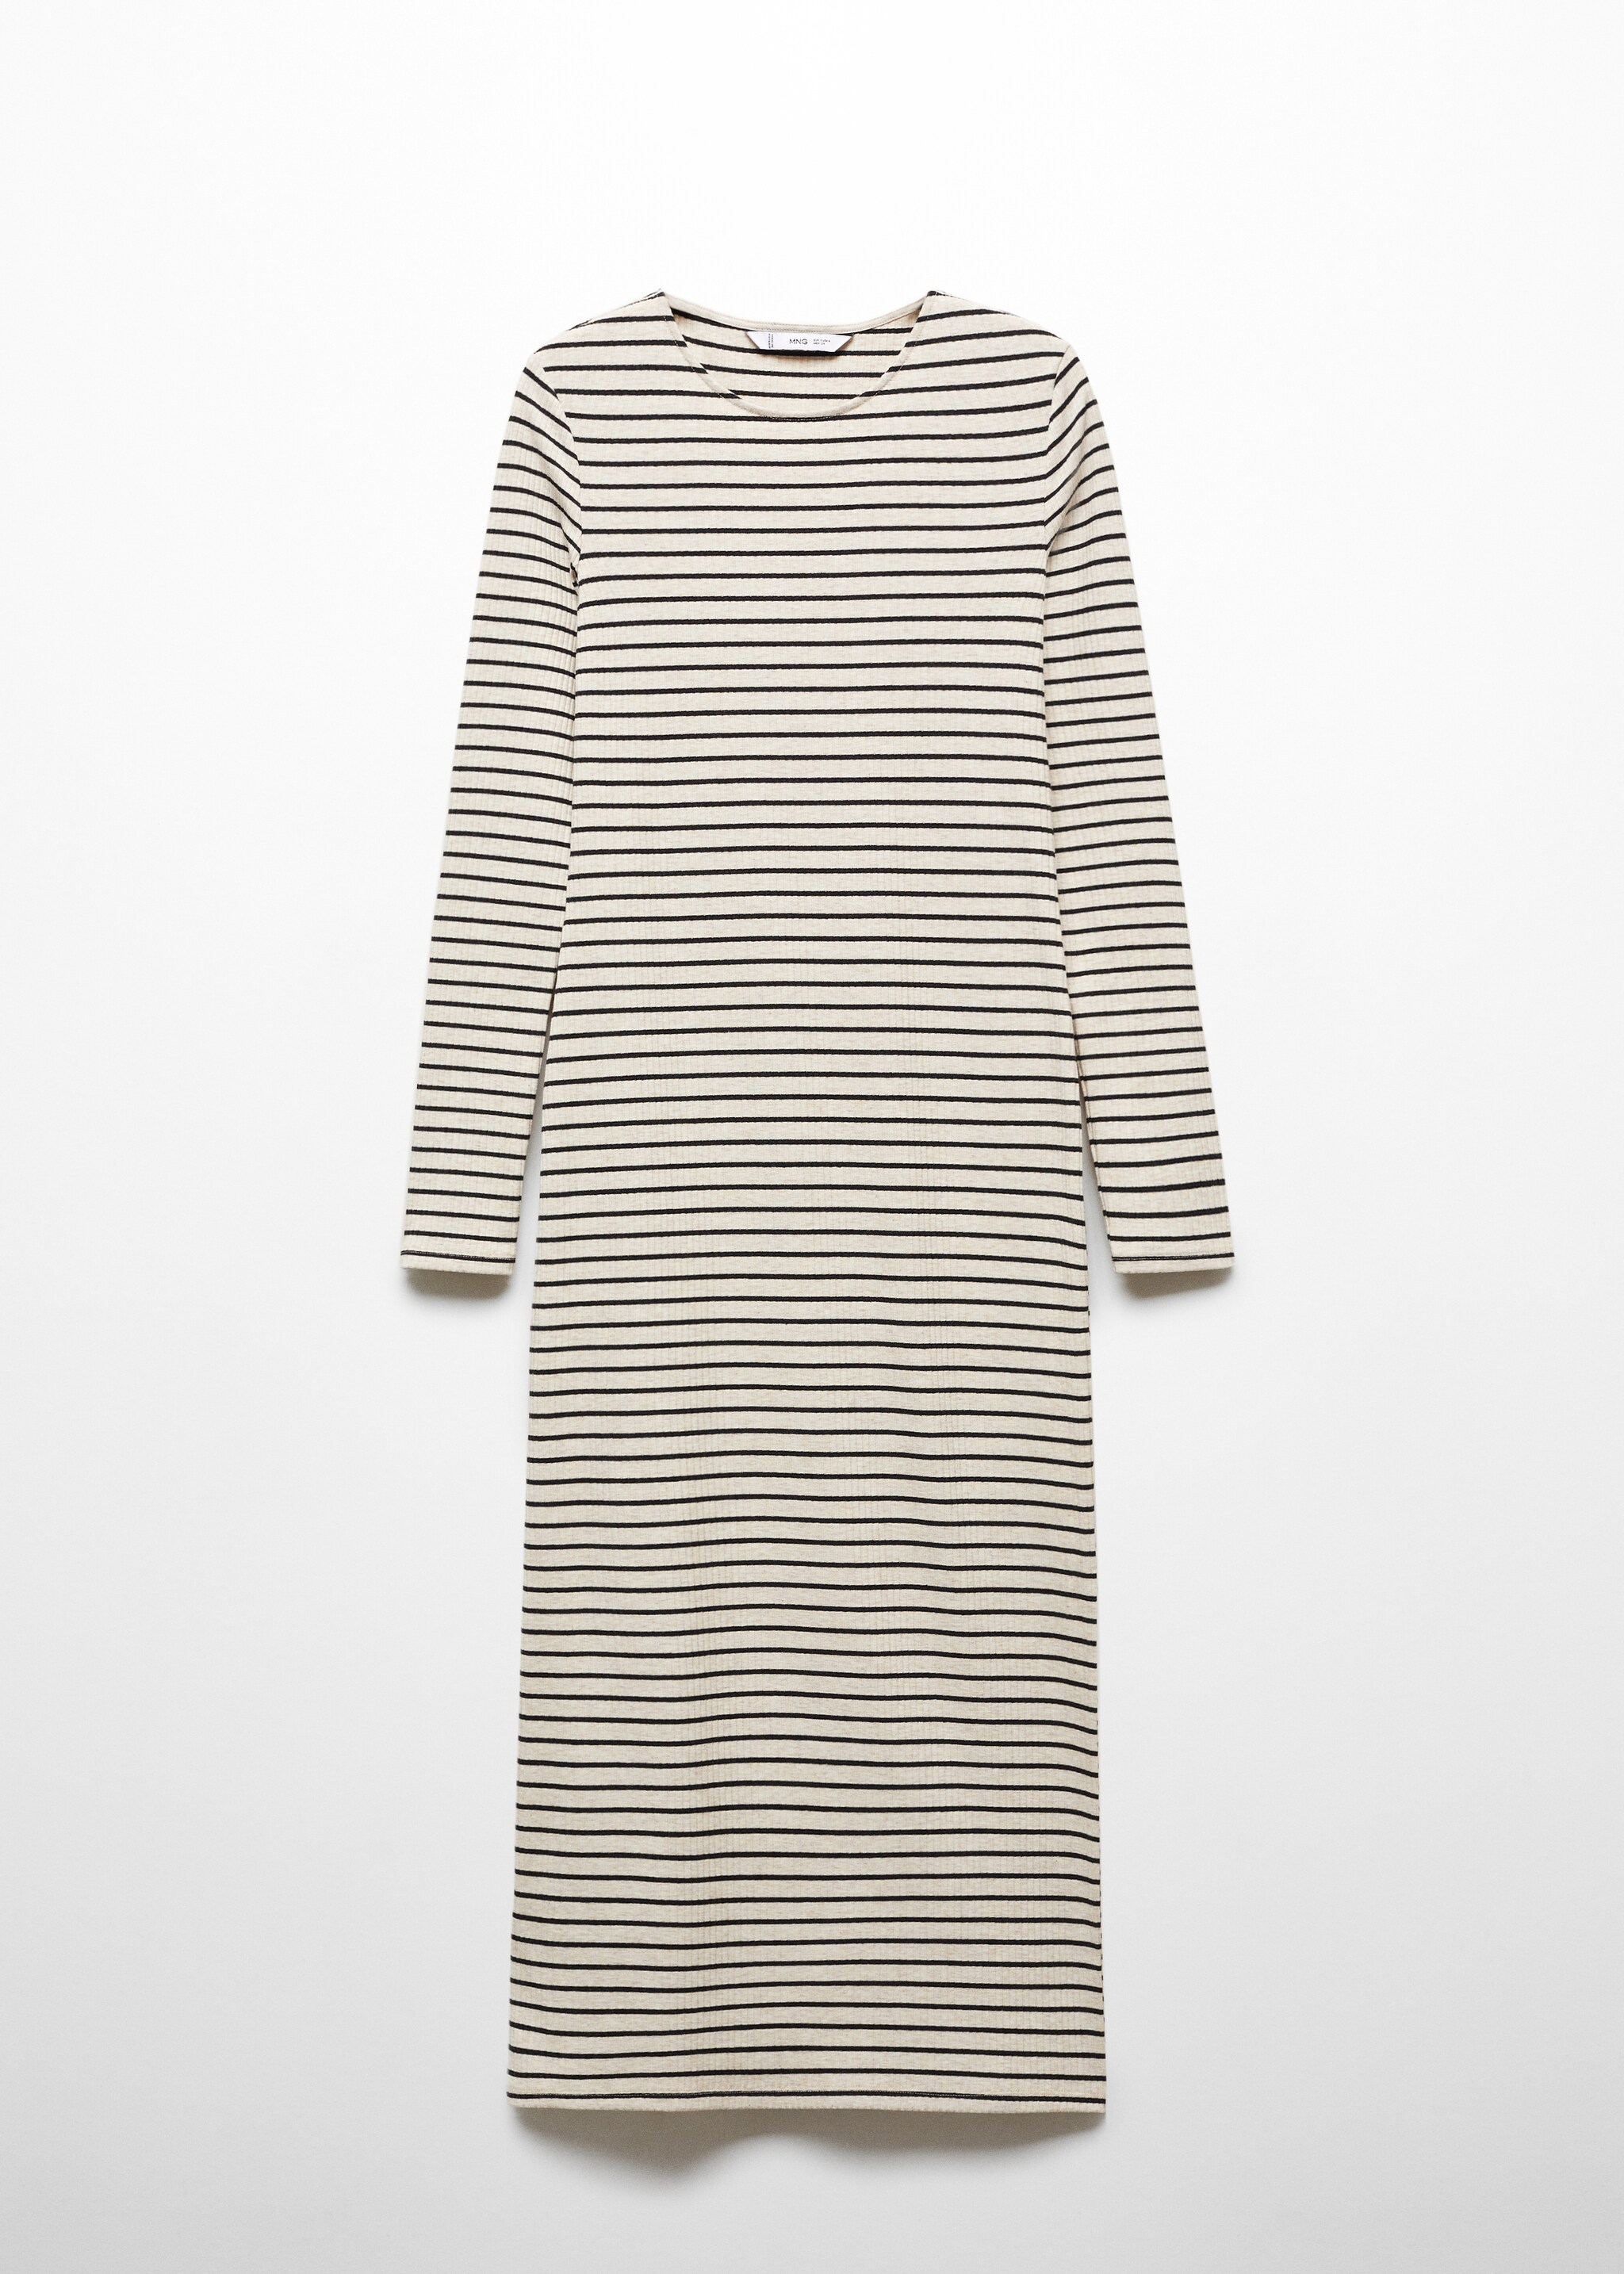 Striped ribbed dress - Article without model